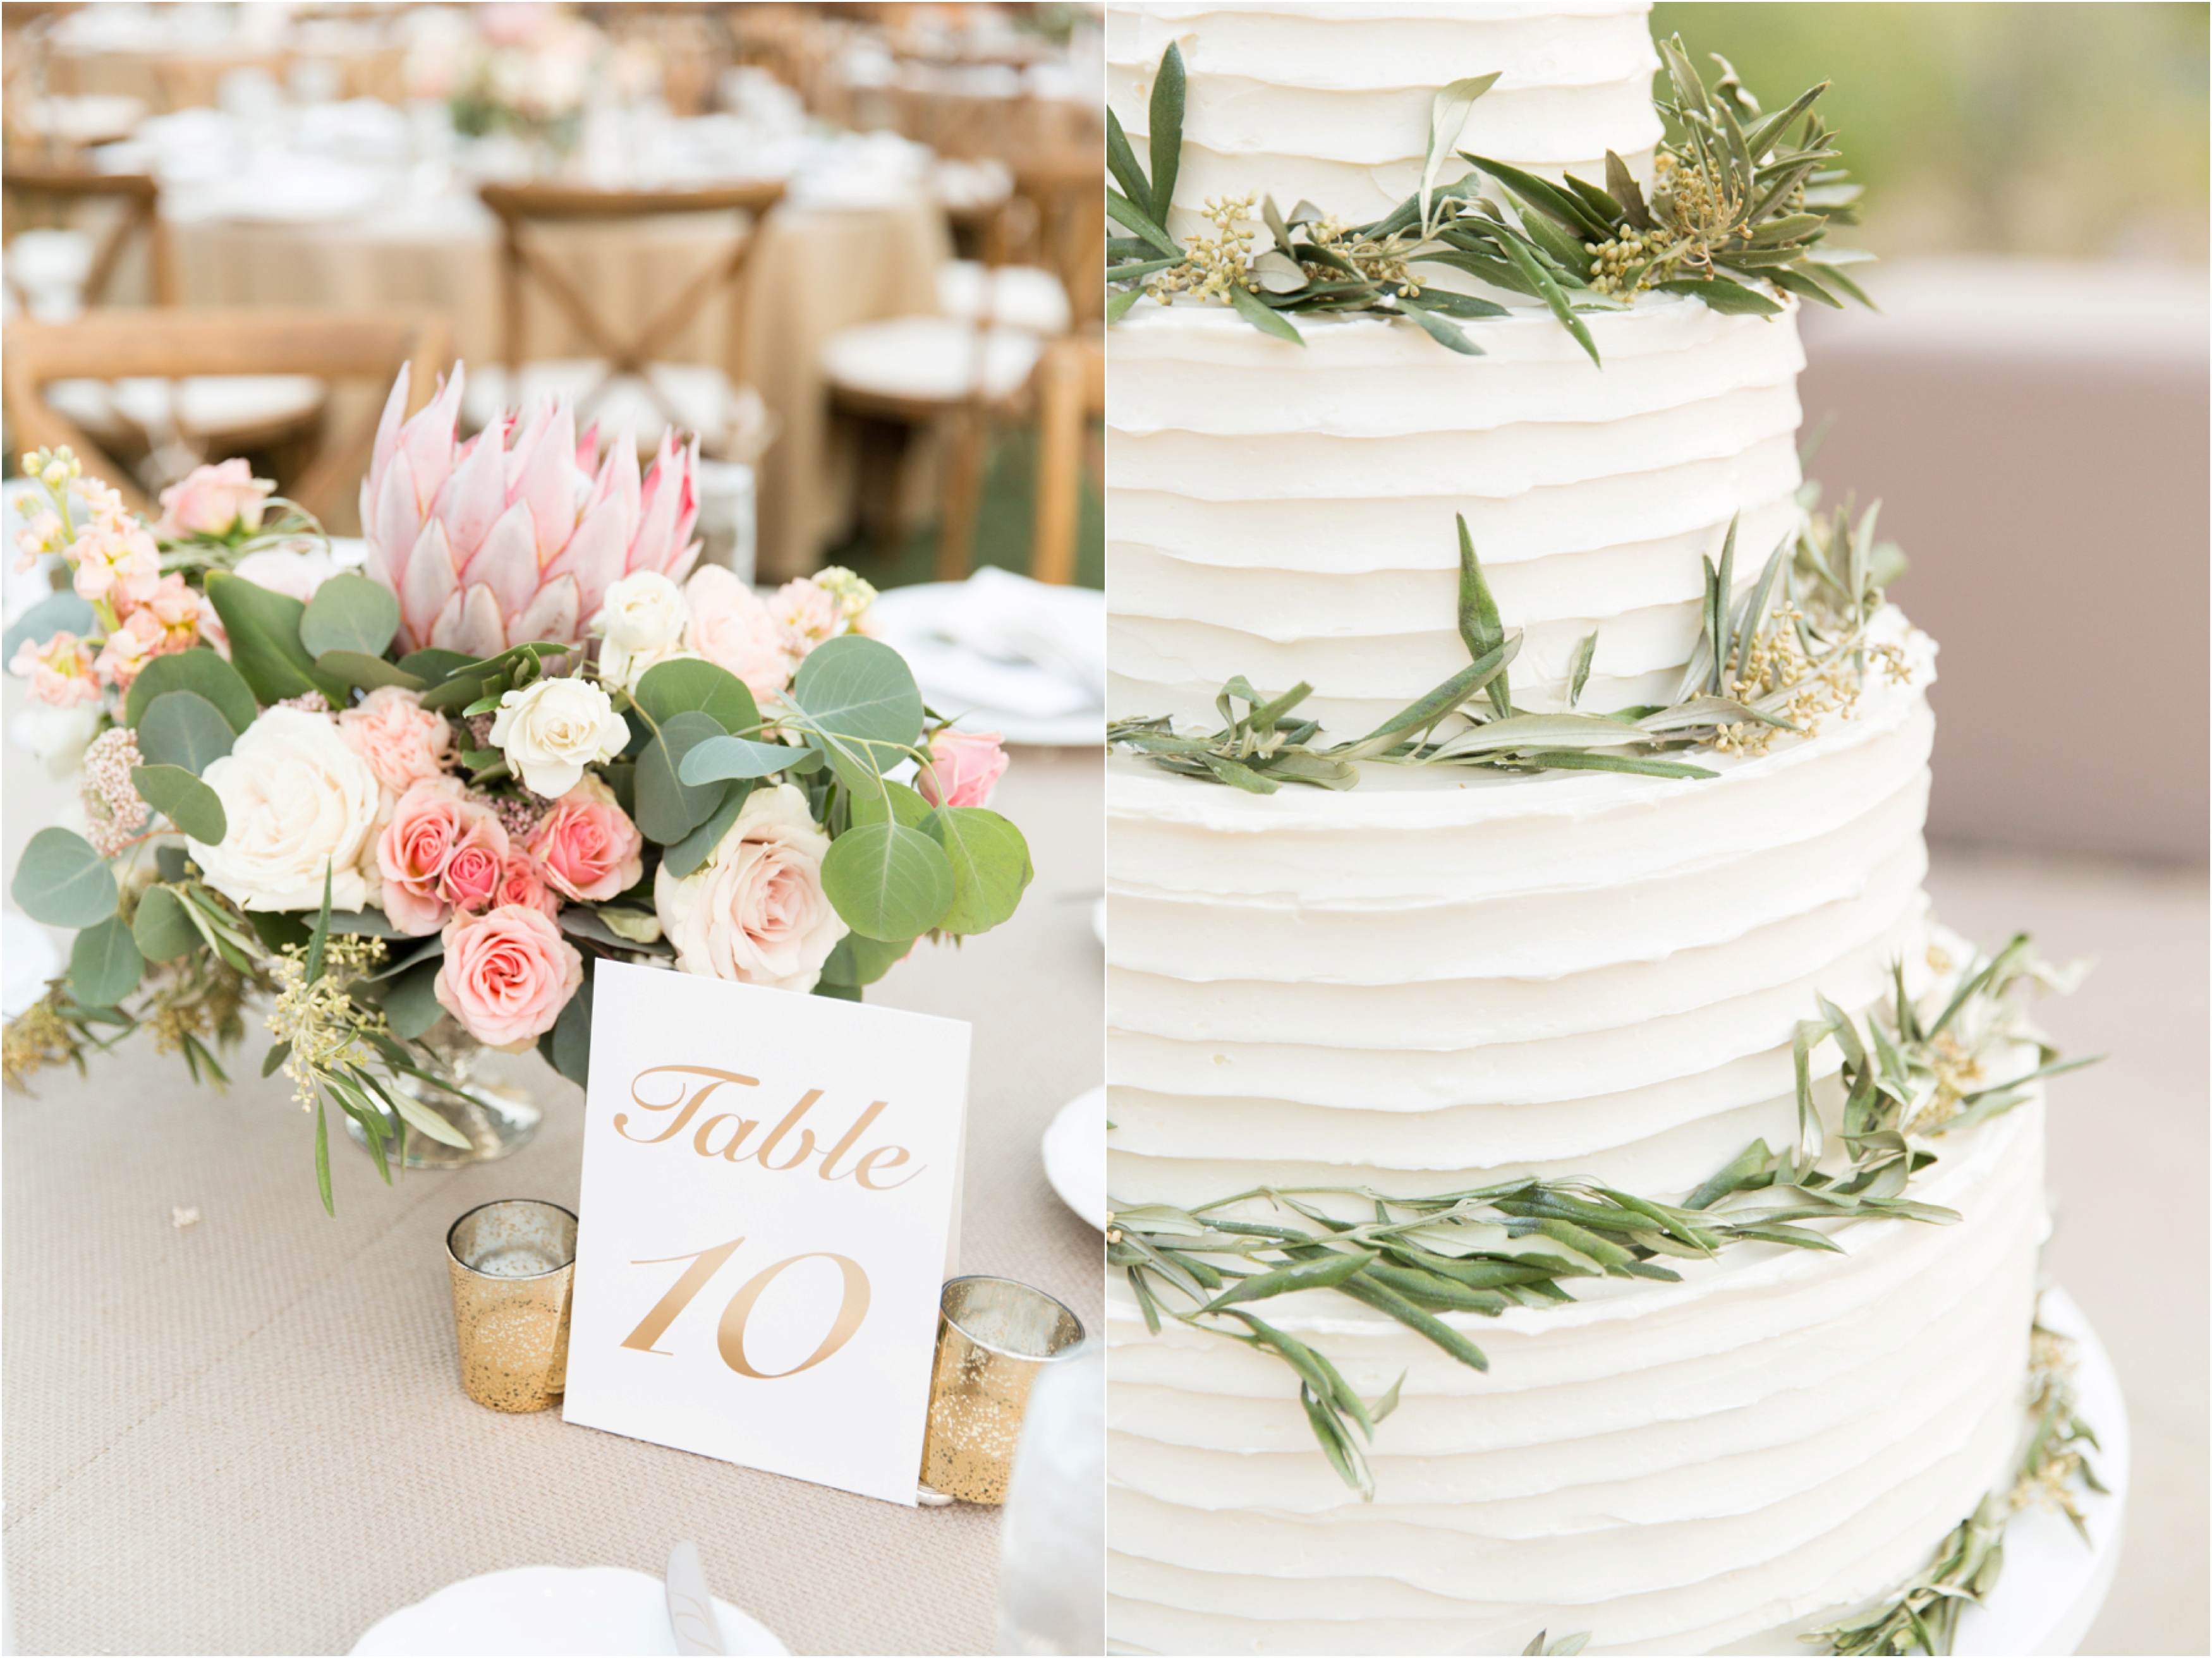 Table decoration and 4 tier white and greenery cake